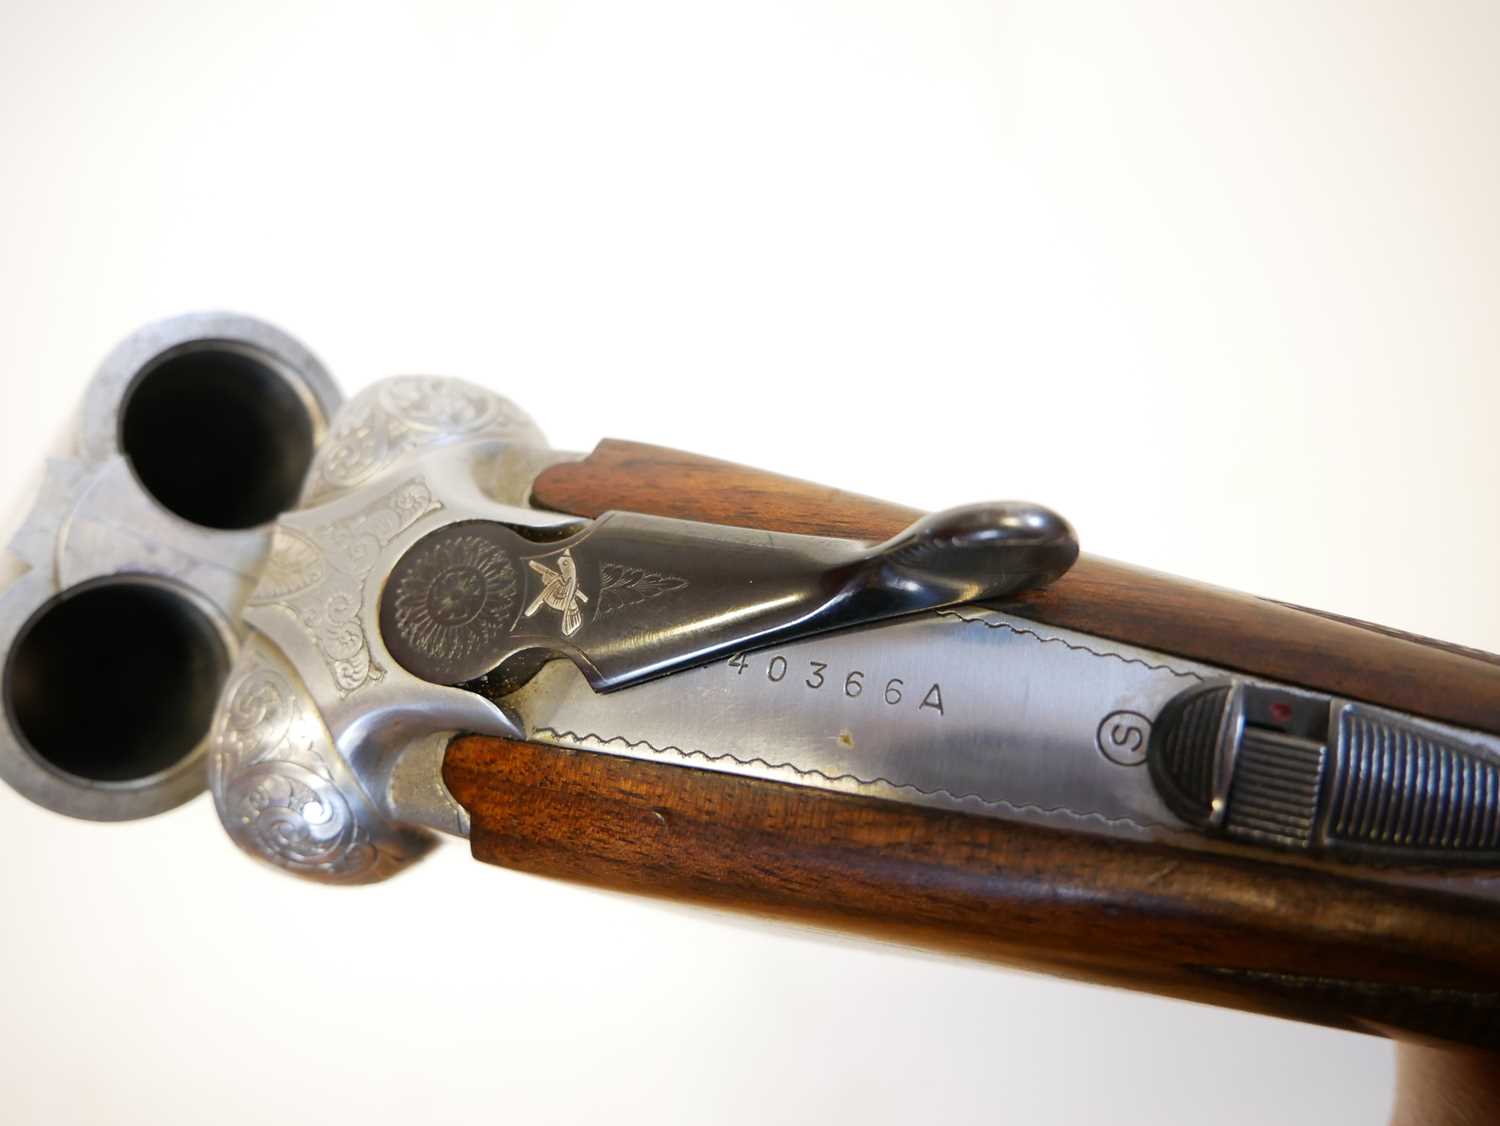 Beretta 12 bore side by side Model 626E shotgun, serial number A40366A, 28inch barrels with half and - Image 11 of 15